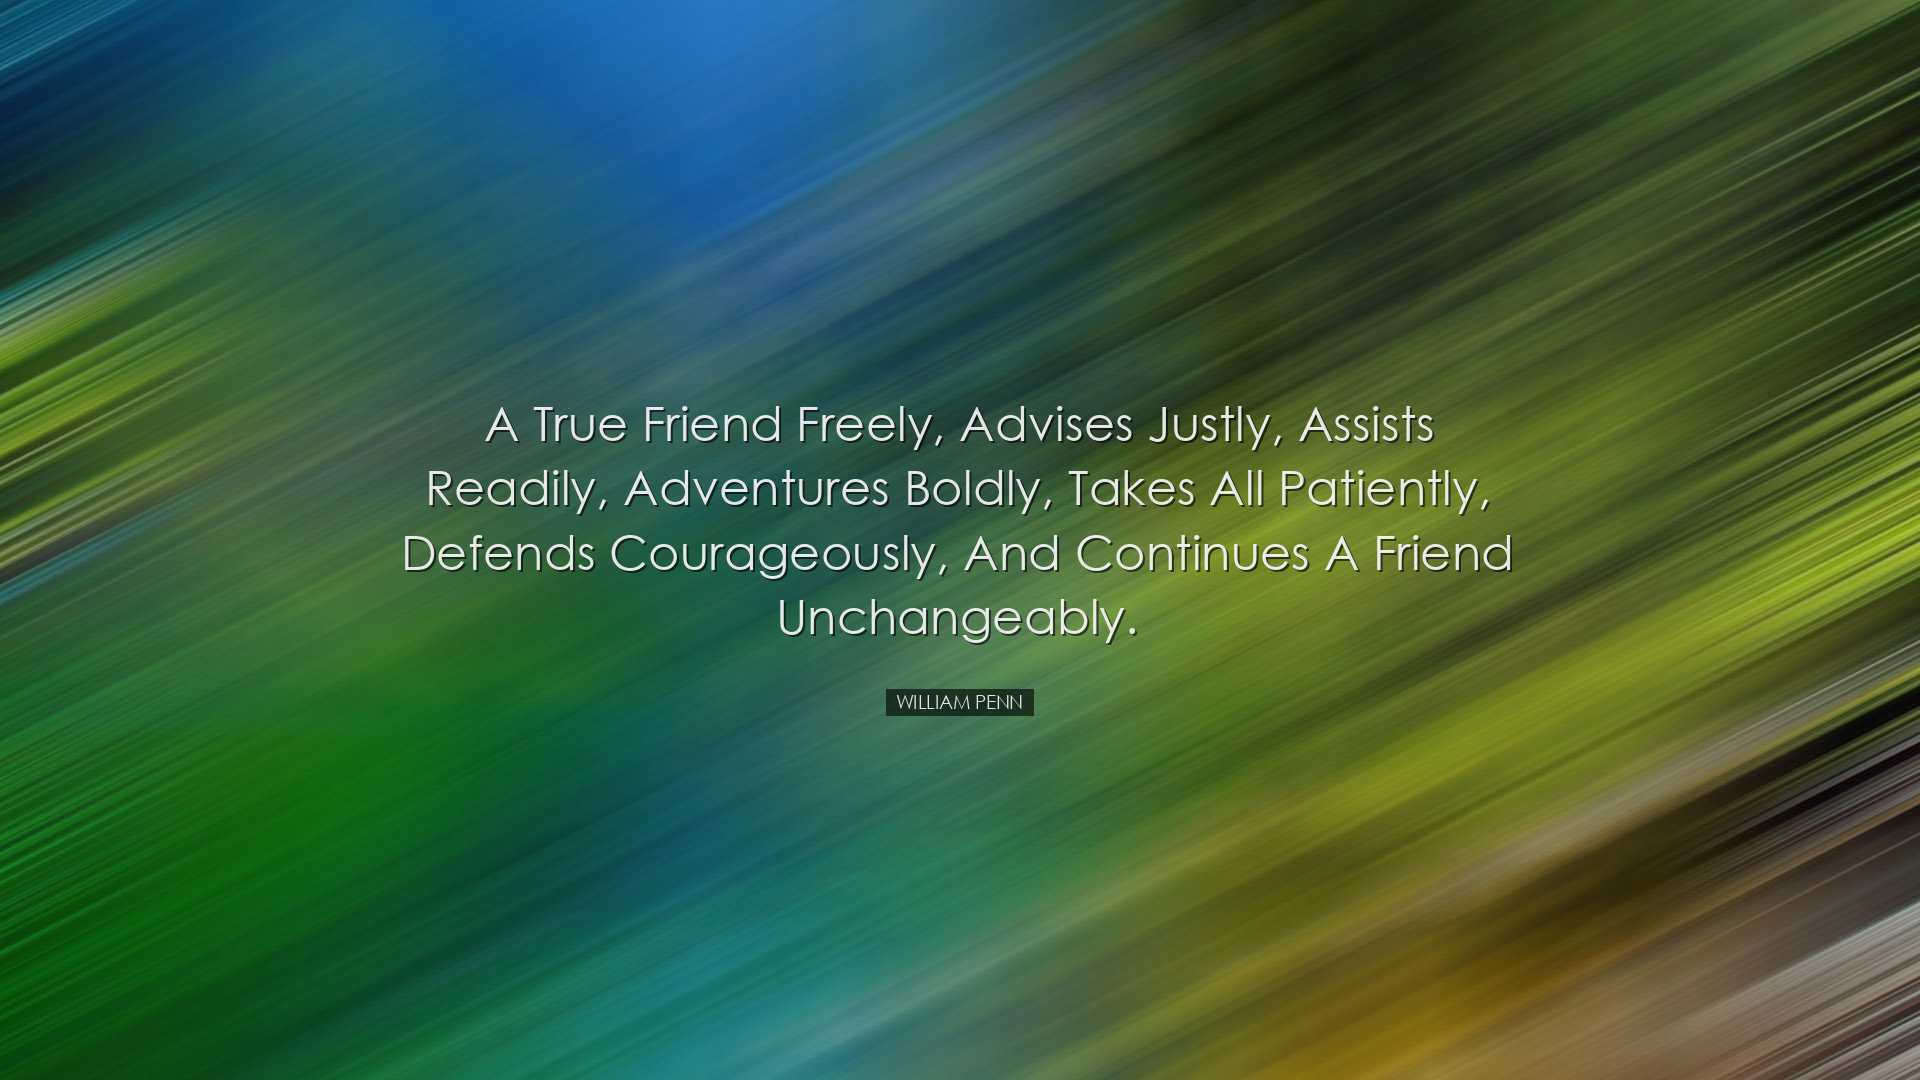 A true friend freely, advises justly, assists readily, adventures